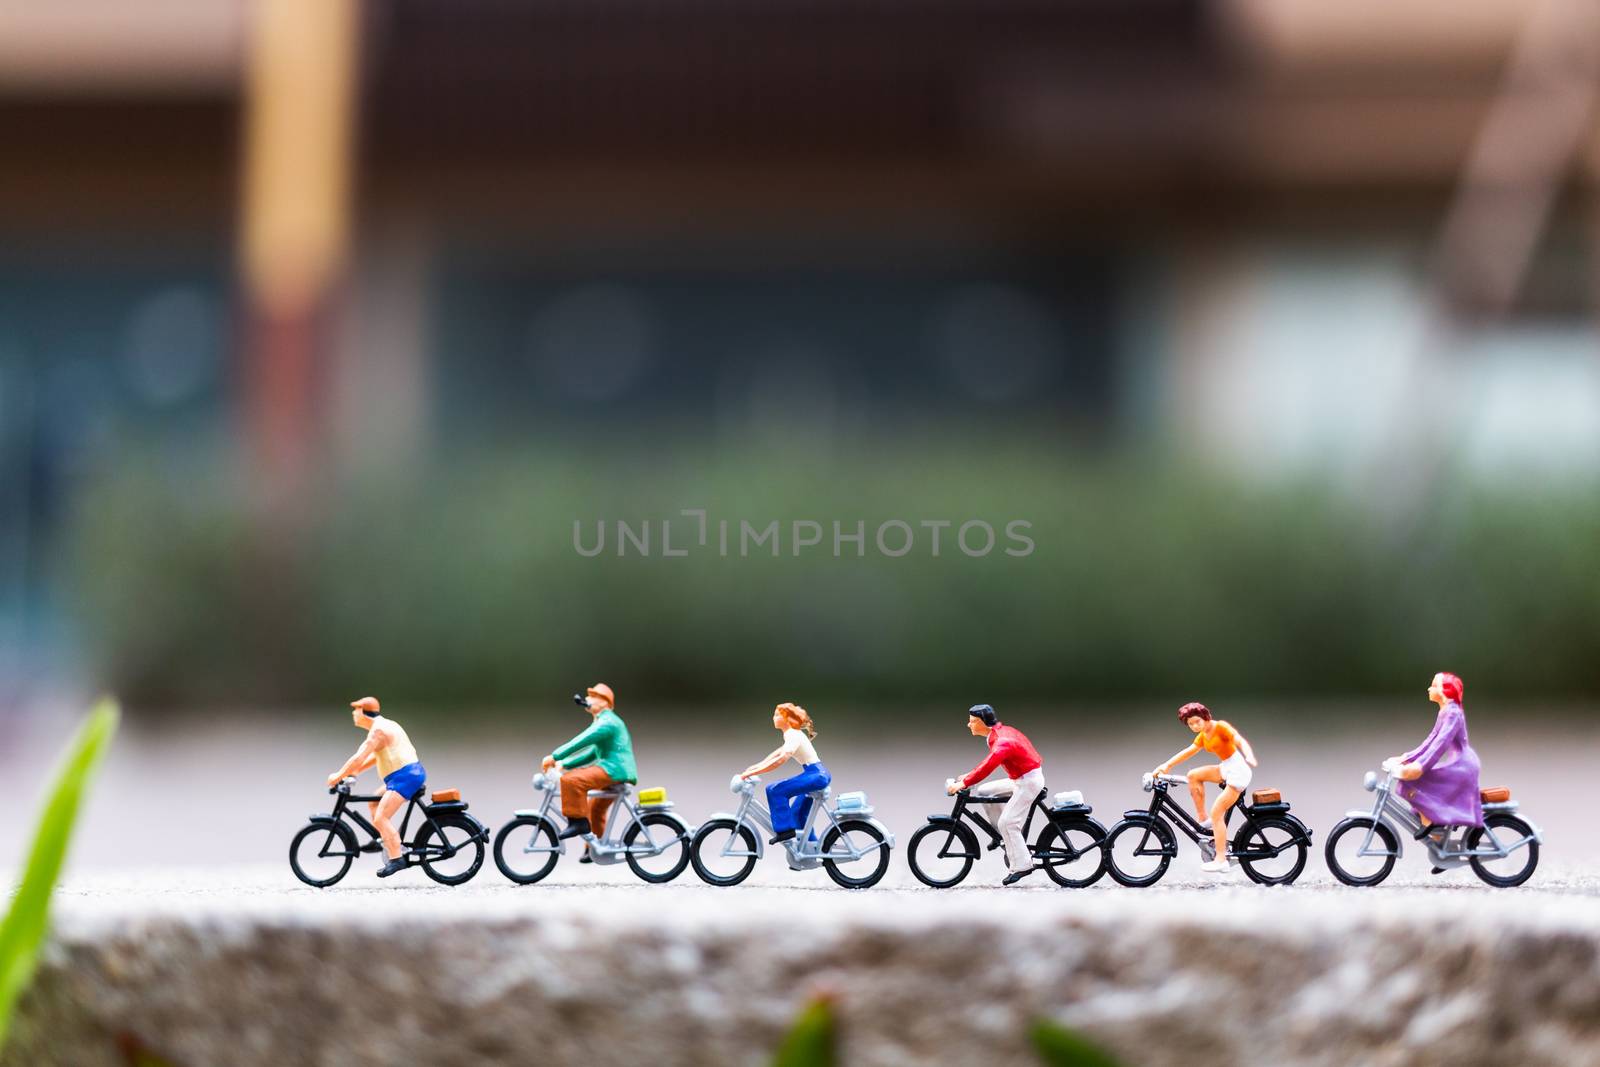 Miniature people travellers with bicycle in the park by sirichaiyaymicro